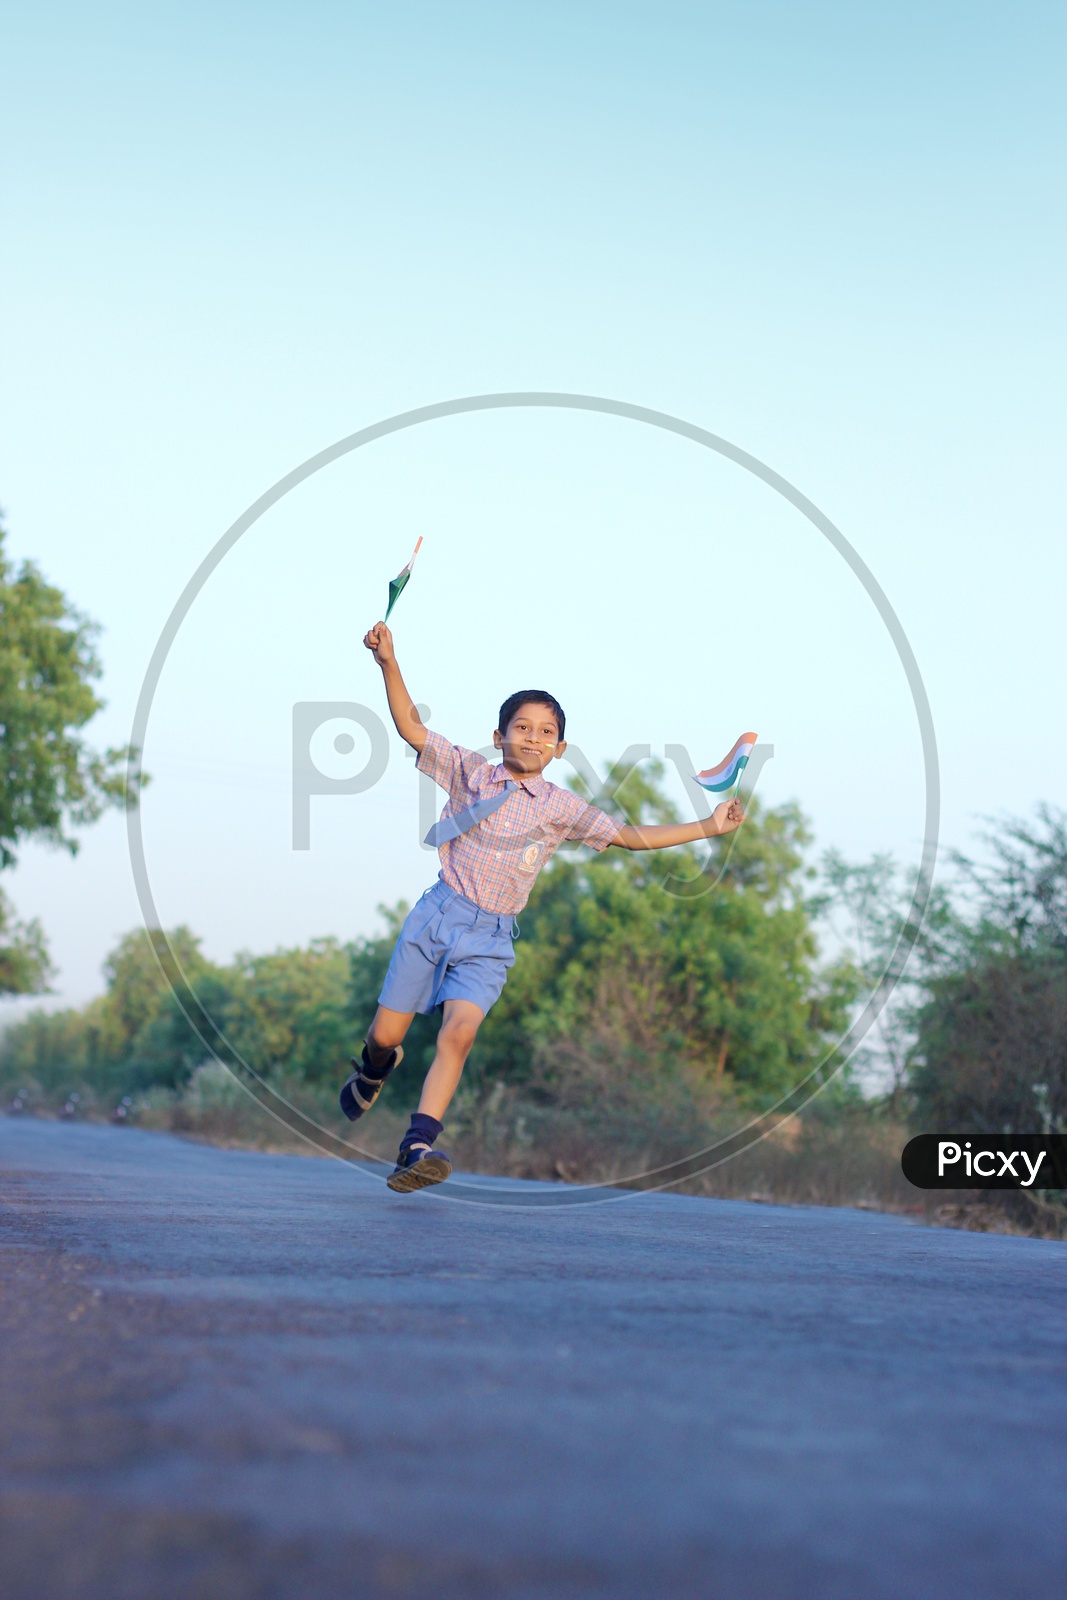 Indian Child running with Indian Flags in Hand